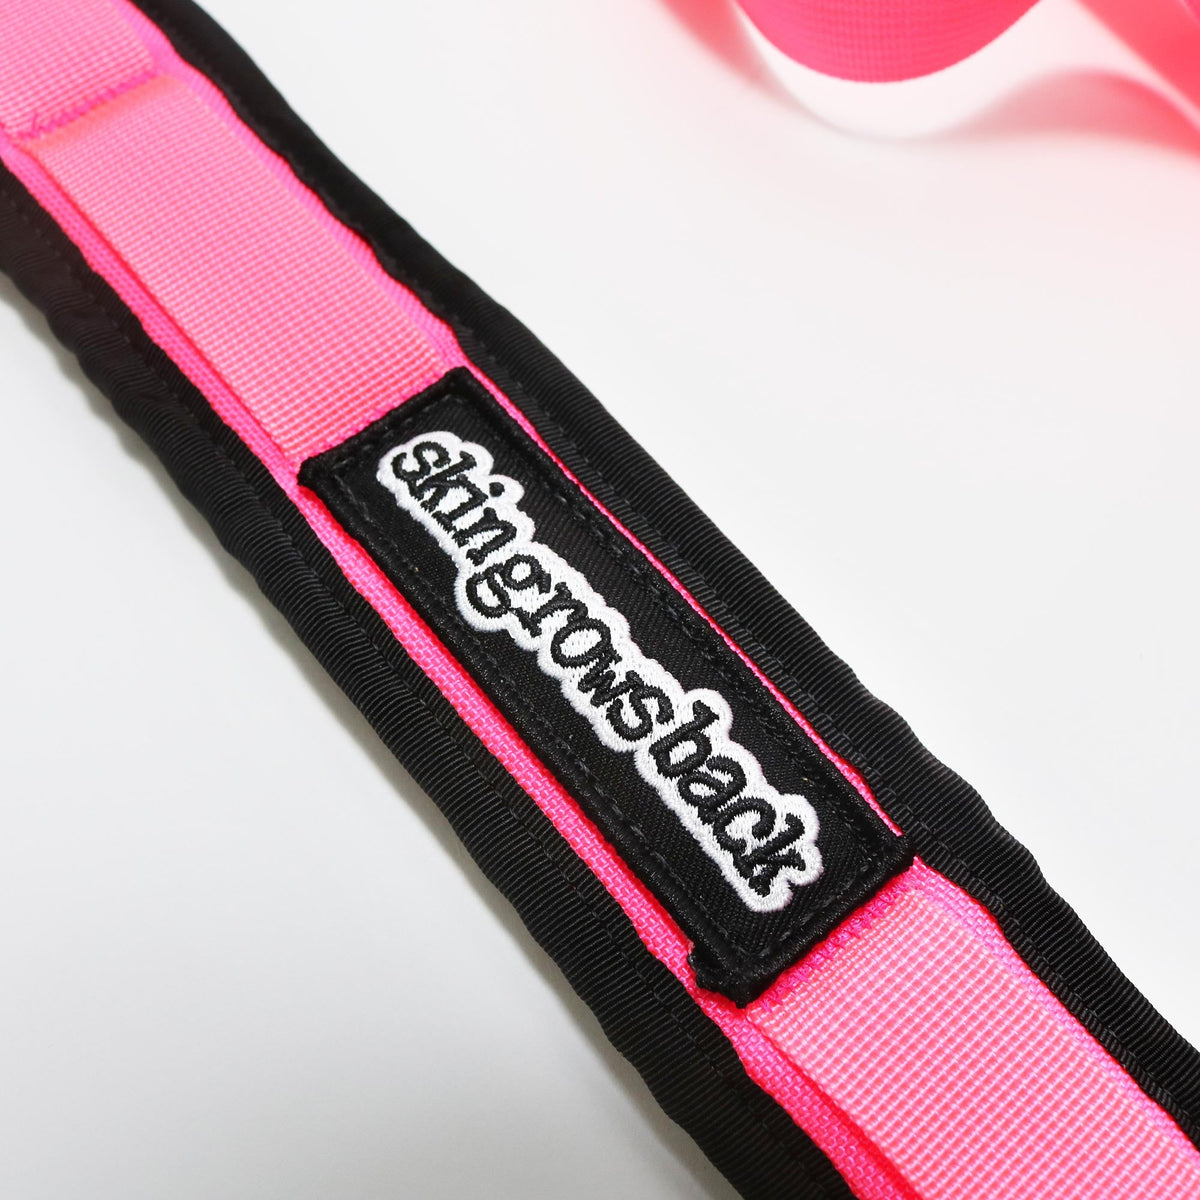 skingrowsback 3Point Cycling Camera Strap neon pink Made in Australia